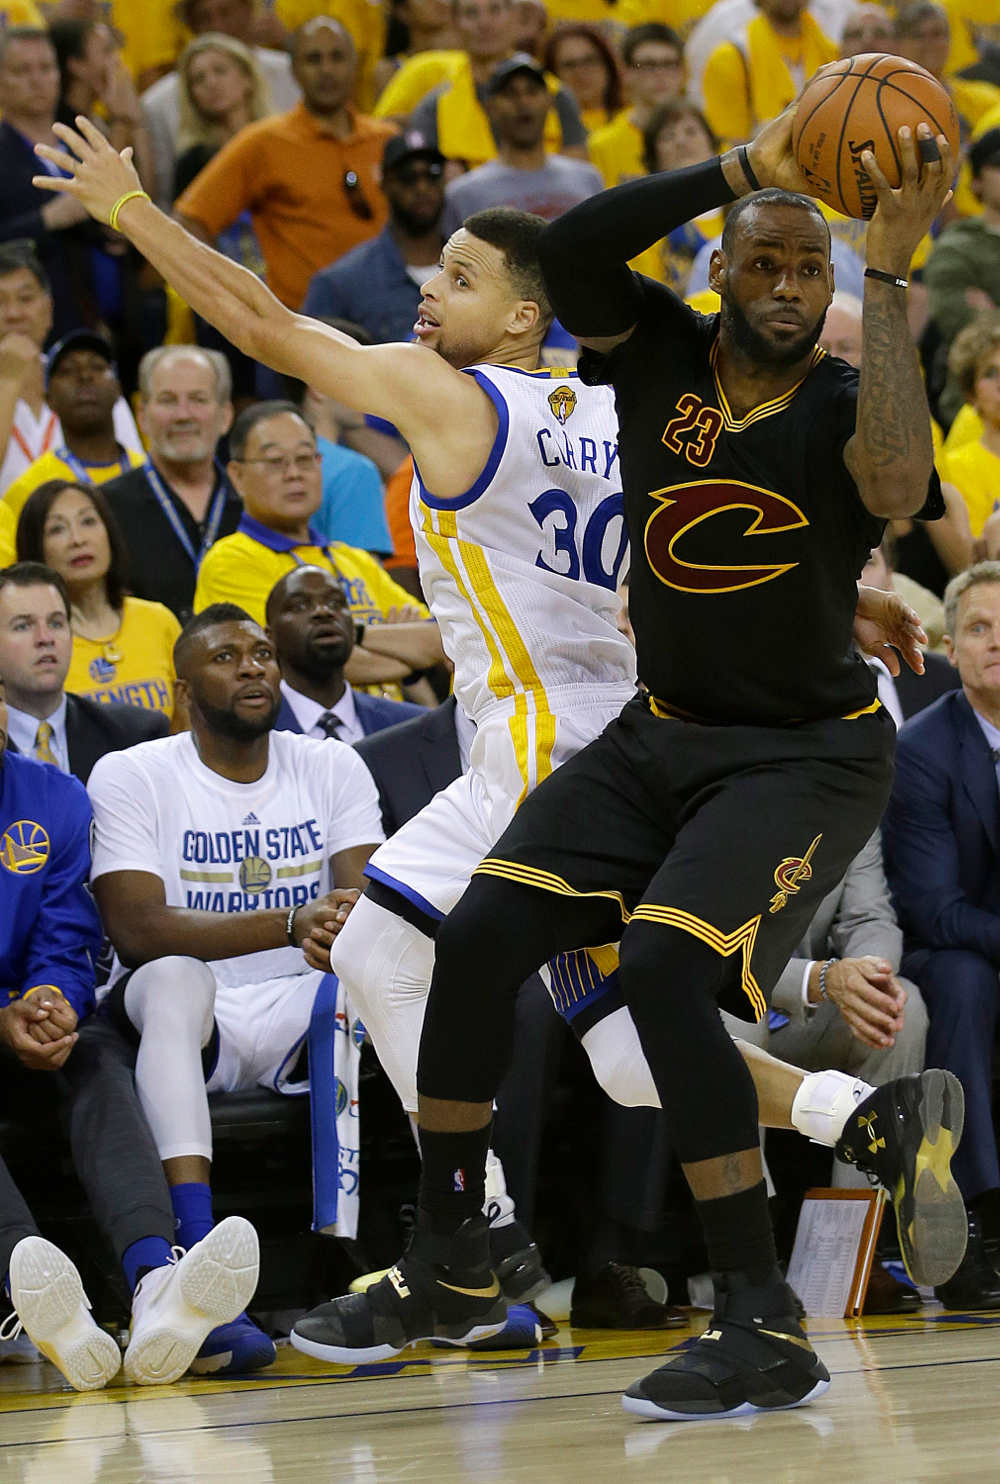 Cleveland Cavaliers forward LeBron James is defended by Golden State Warriors guard Stephen Curry